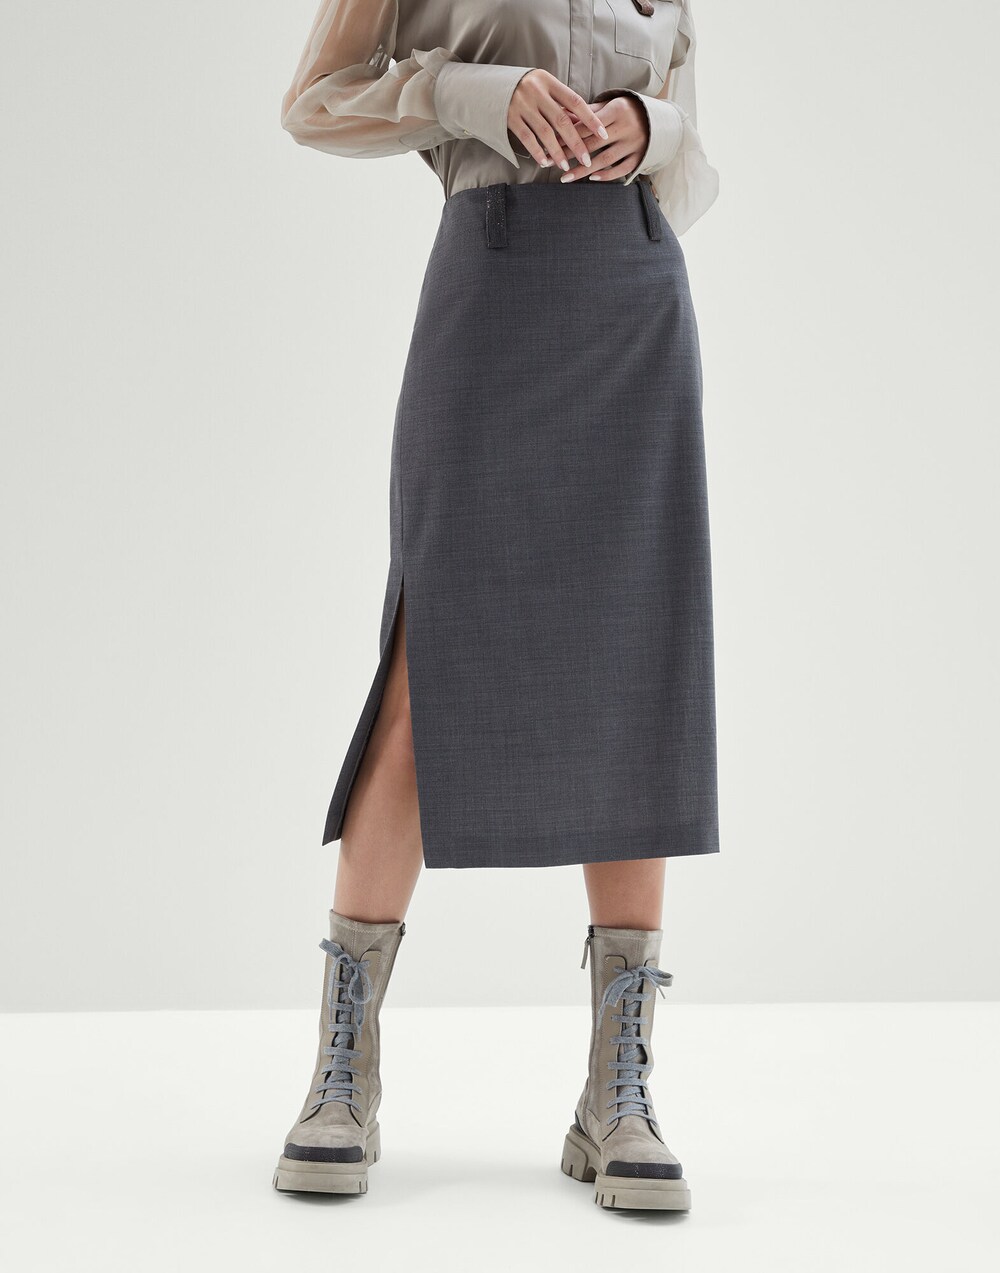 Women's elegant and casual skirts | Brunello Cucinelli